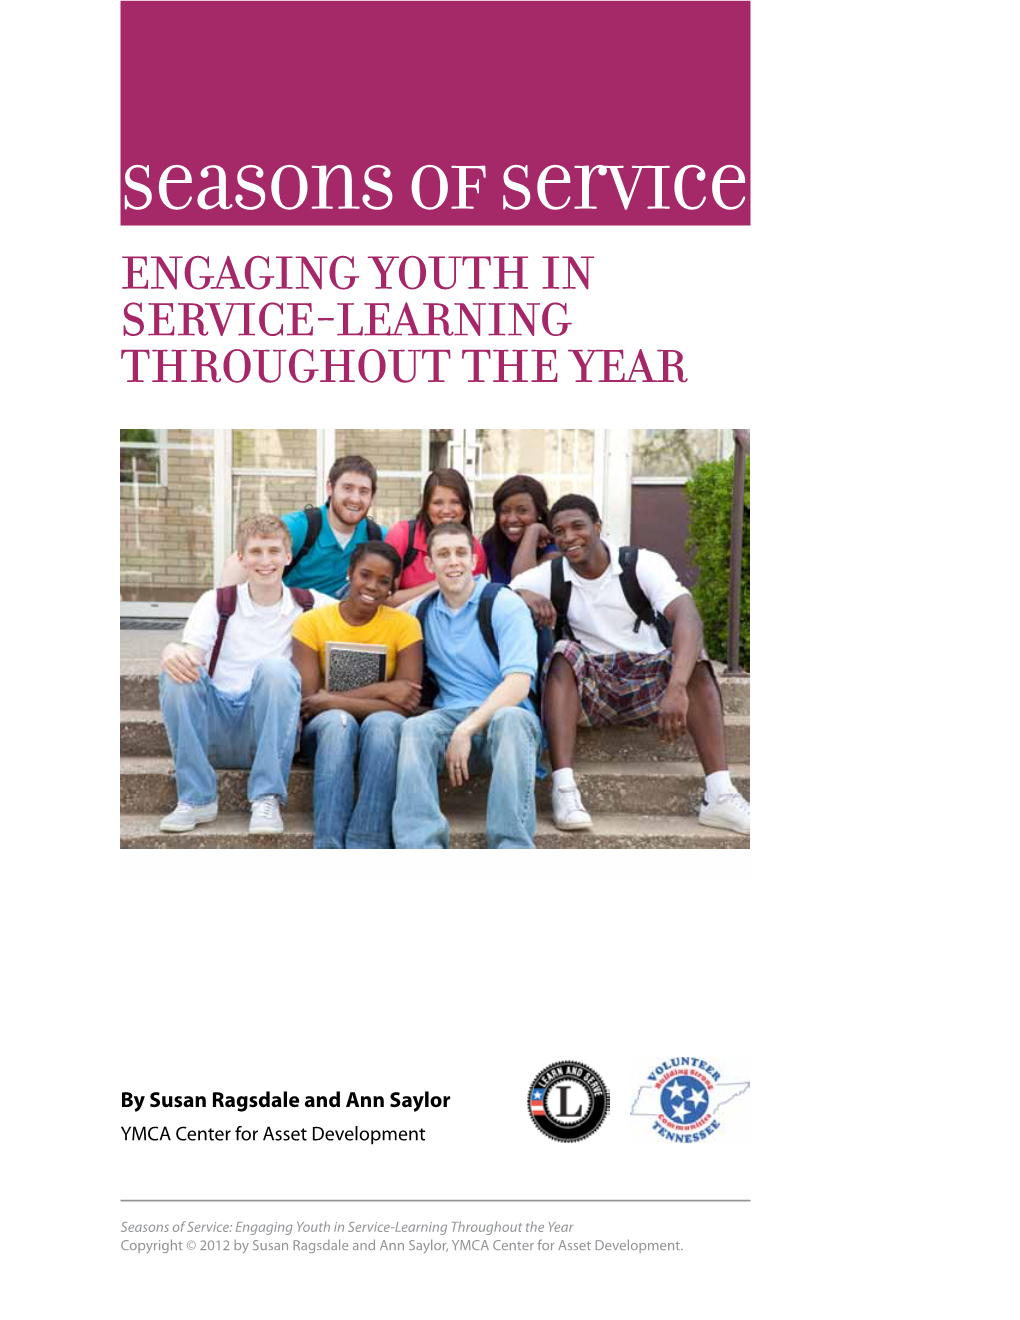 Seasons of Service Engaging Youth in Service-Learning Throughout the Year